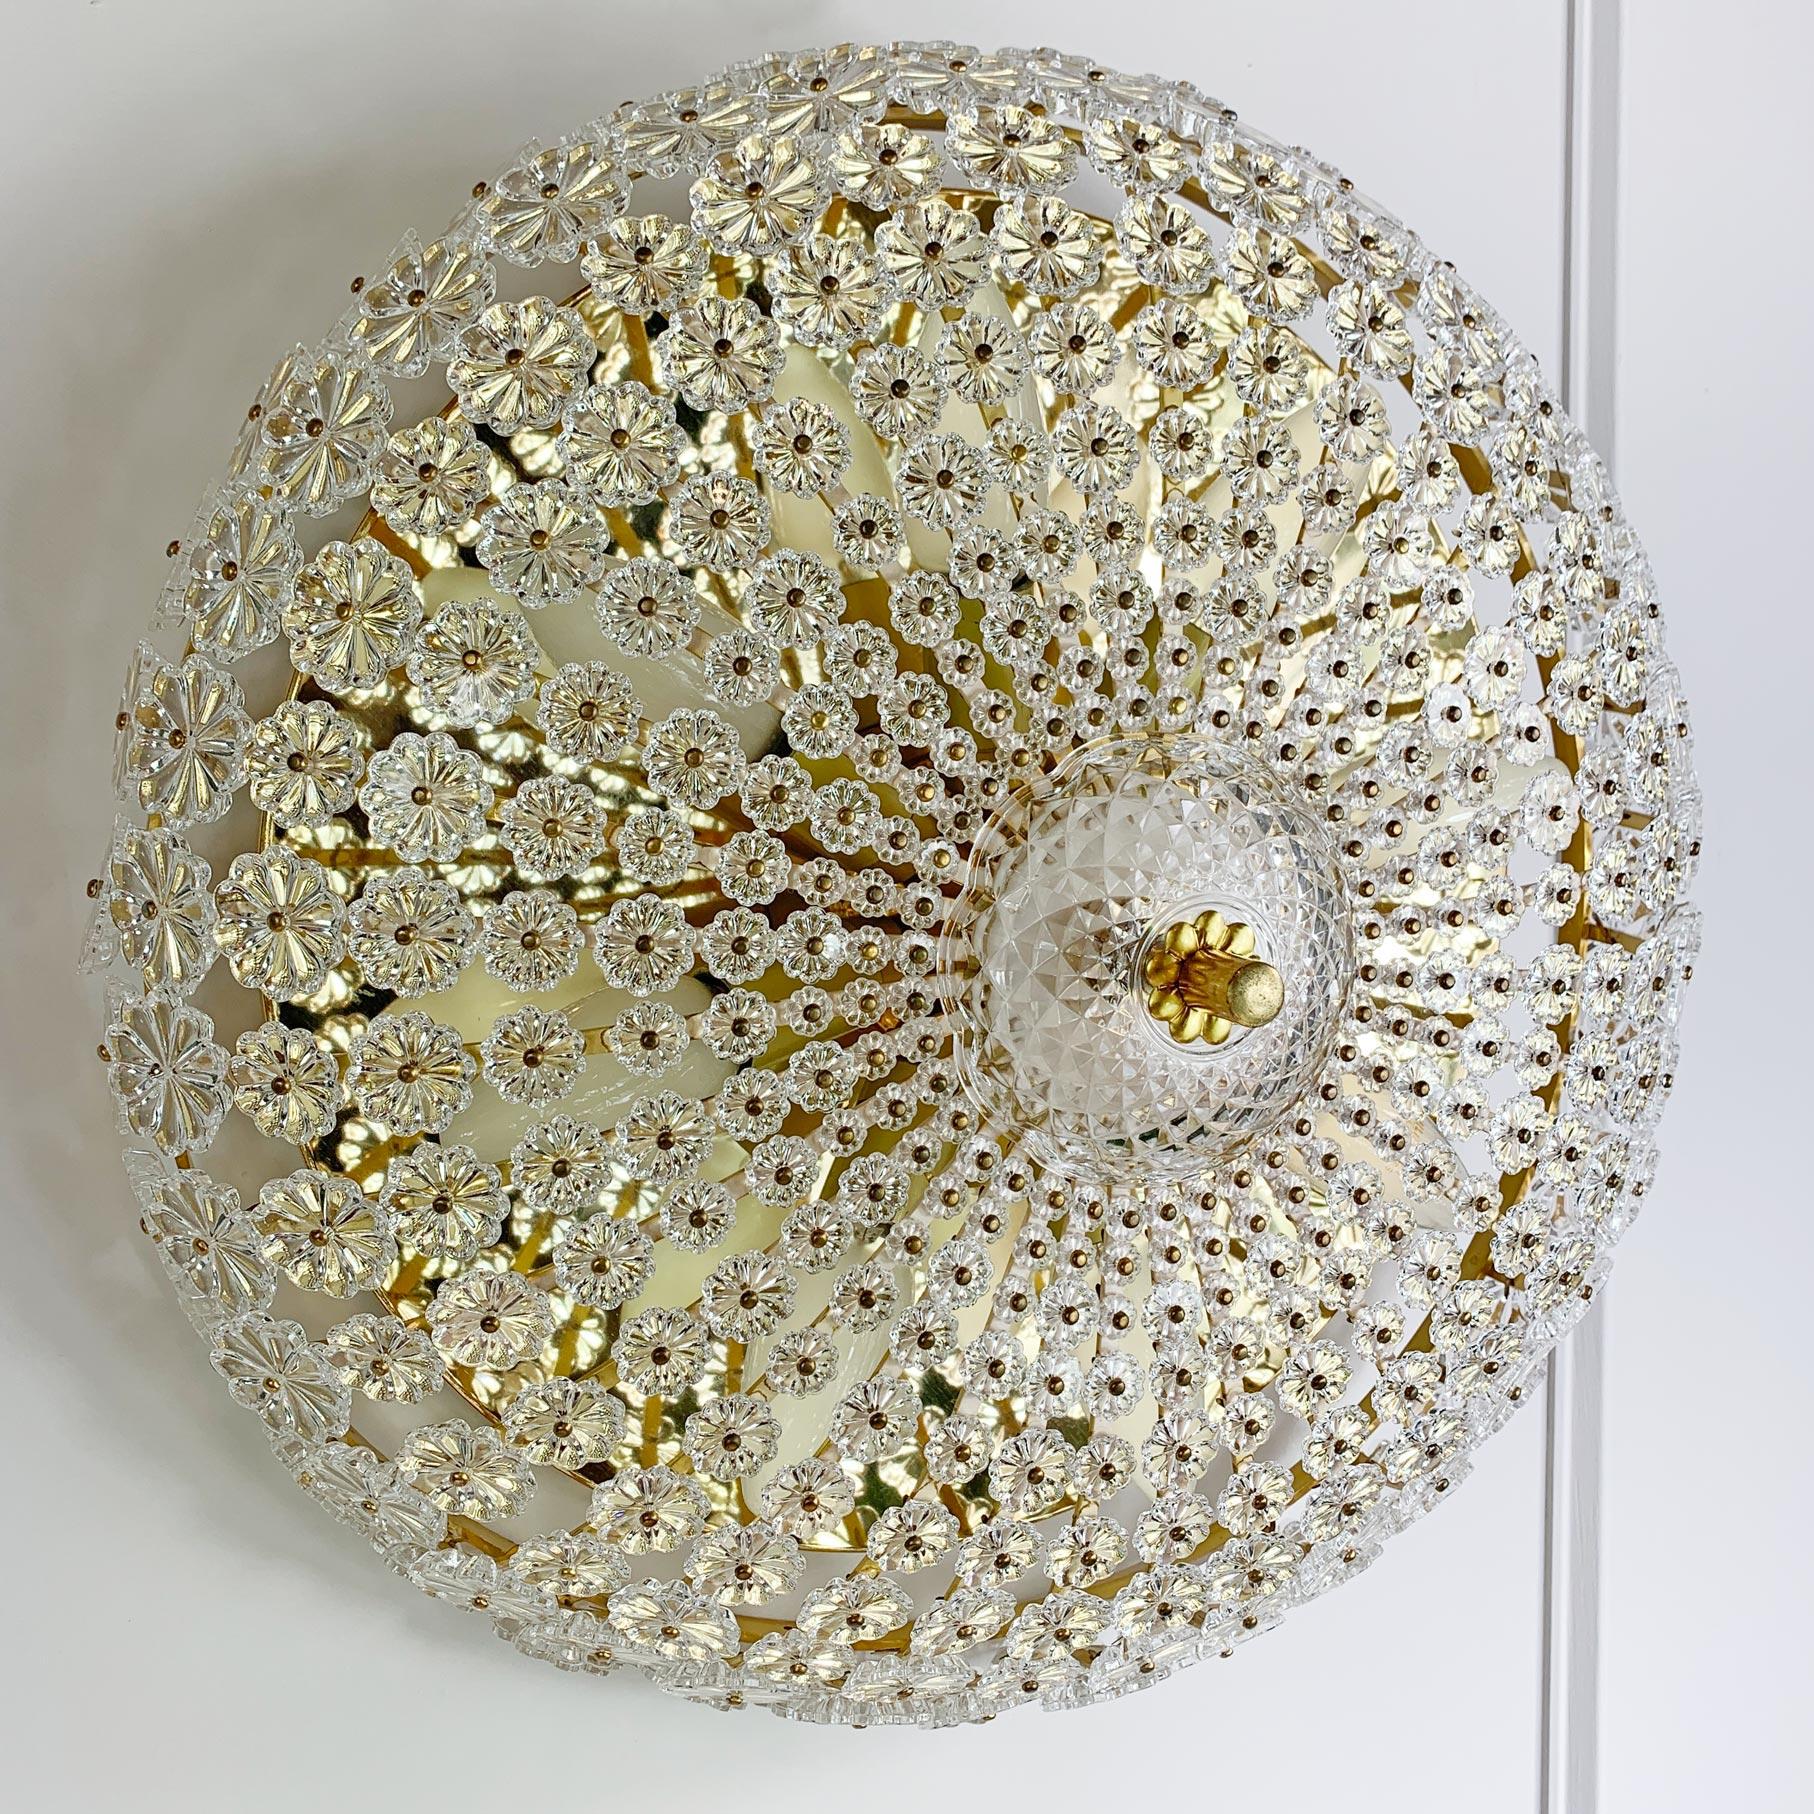 Emil Stejnar (Austria) sunburst flushmount light, designed for the H. Richter company 1950’s.
Very elegant large flushmount with hundreds of individual small glass reverse cut flowers on a brass frame, with a central cut glass cup.

The light